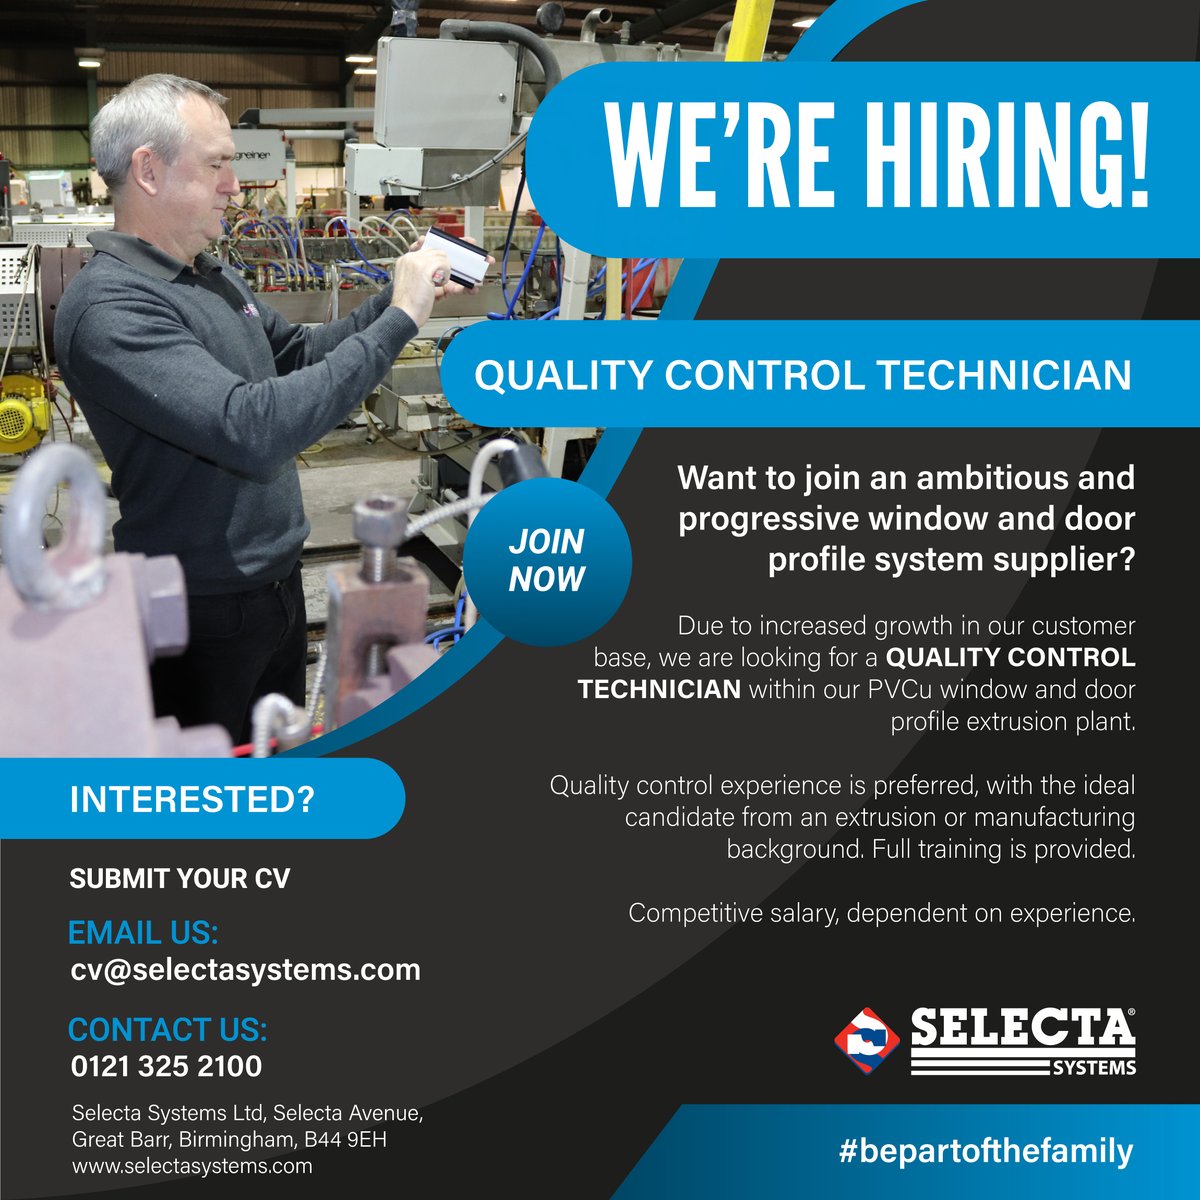 WE'RE HIRING! Due to continued growth and expansion, we are looking for the ideal candidates for the following positions: ☑️Technical Engineers ☑️Quality Control Technician Interested? Send in your CV to cv@selectasystems.com #jobopportunities #jobalert #jobsearch